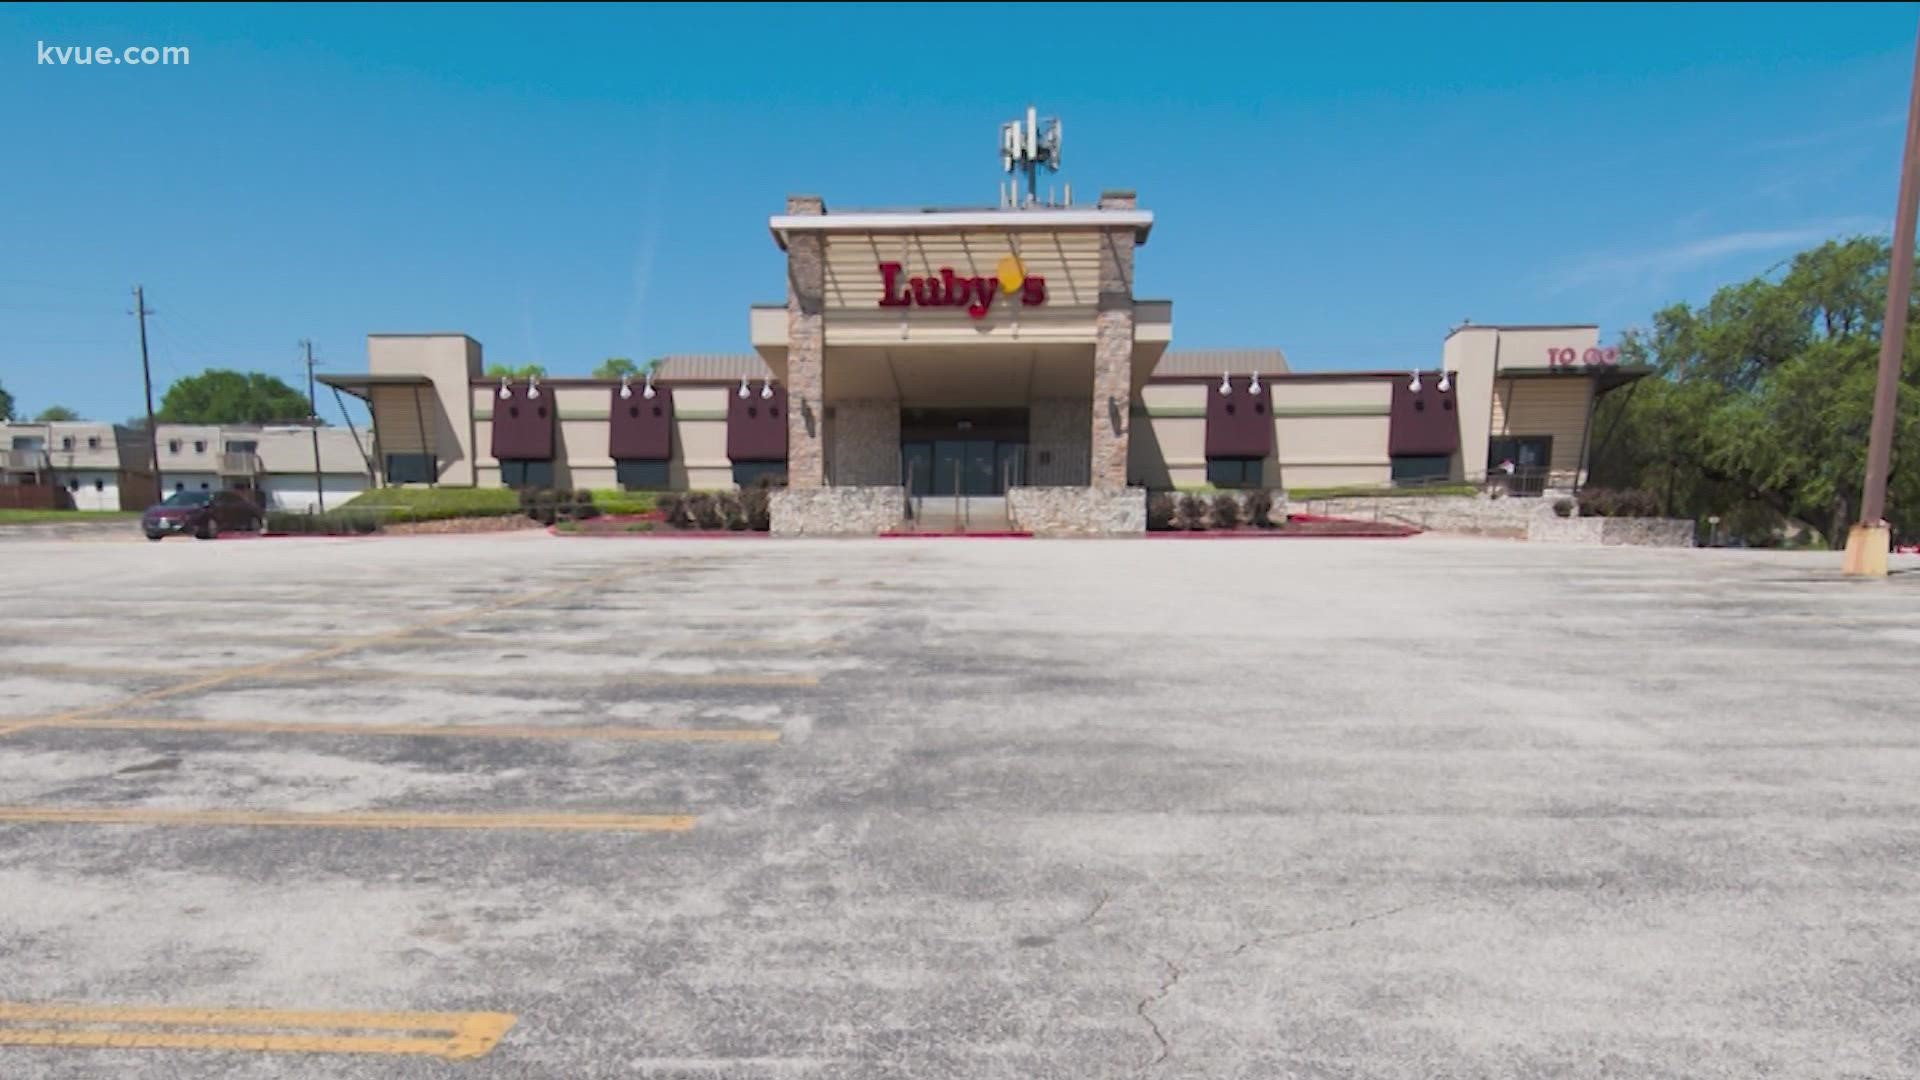 The Luby's in North Austin off North MoPac could become a site for affordable housing.